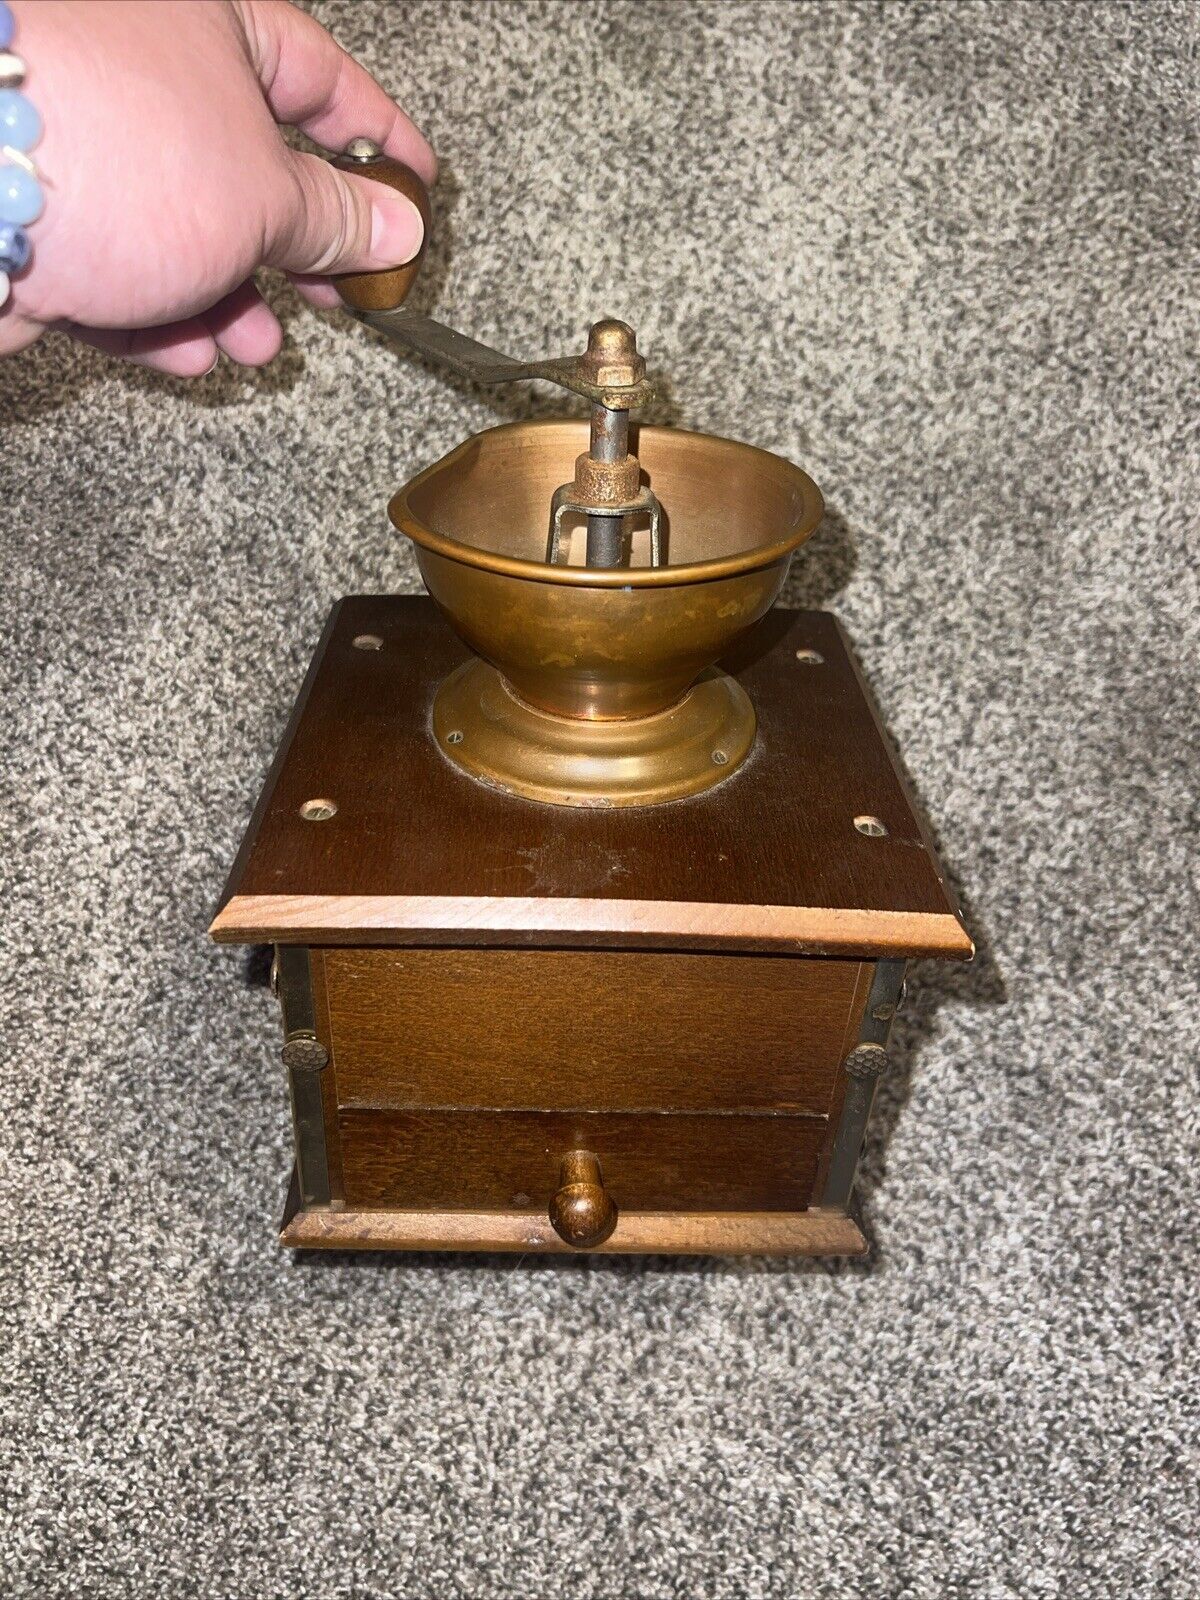 Coffee Grinder Vintage Wood and Copper w/ Drawer Made in Western Germany